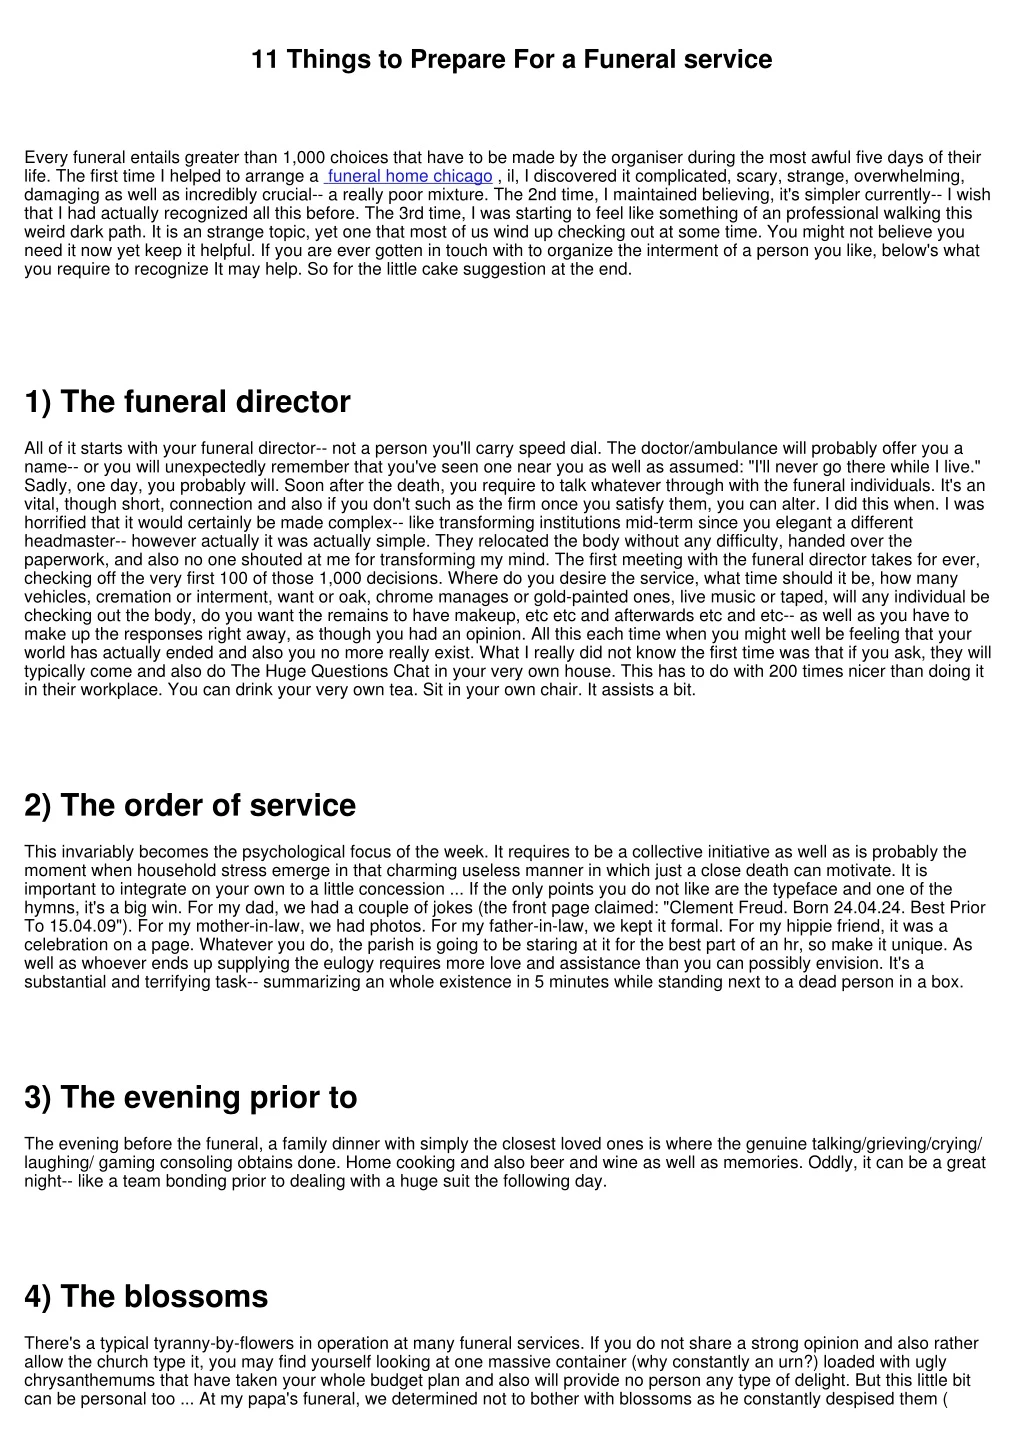 11 things to prepare for a funeral service